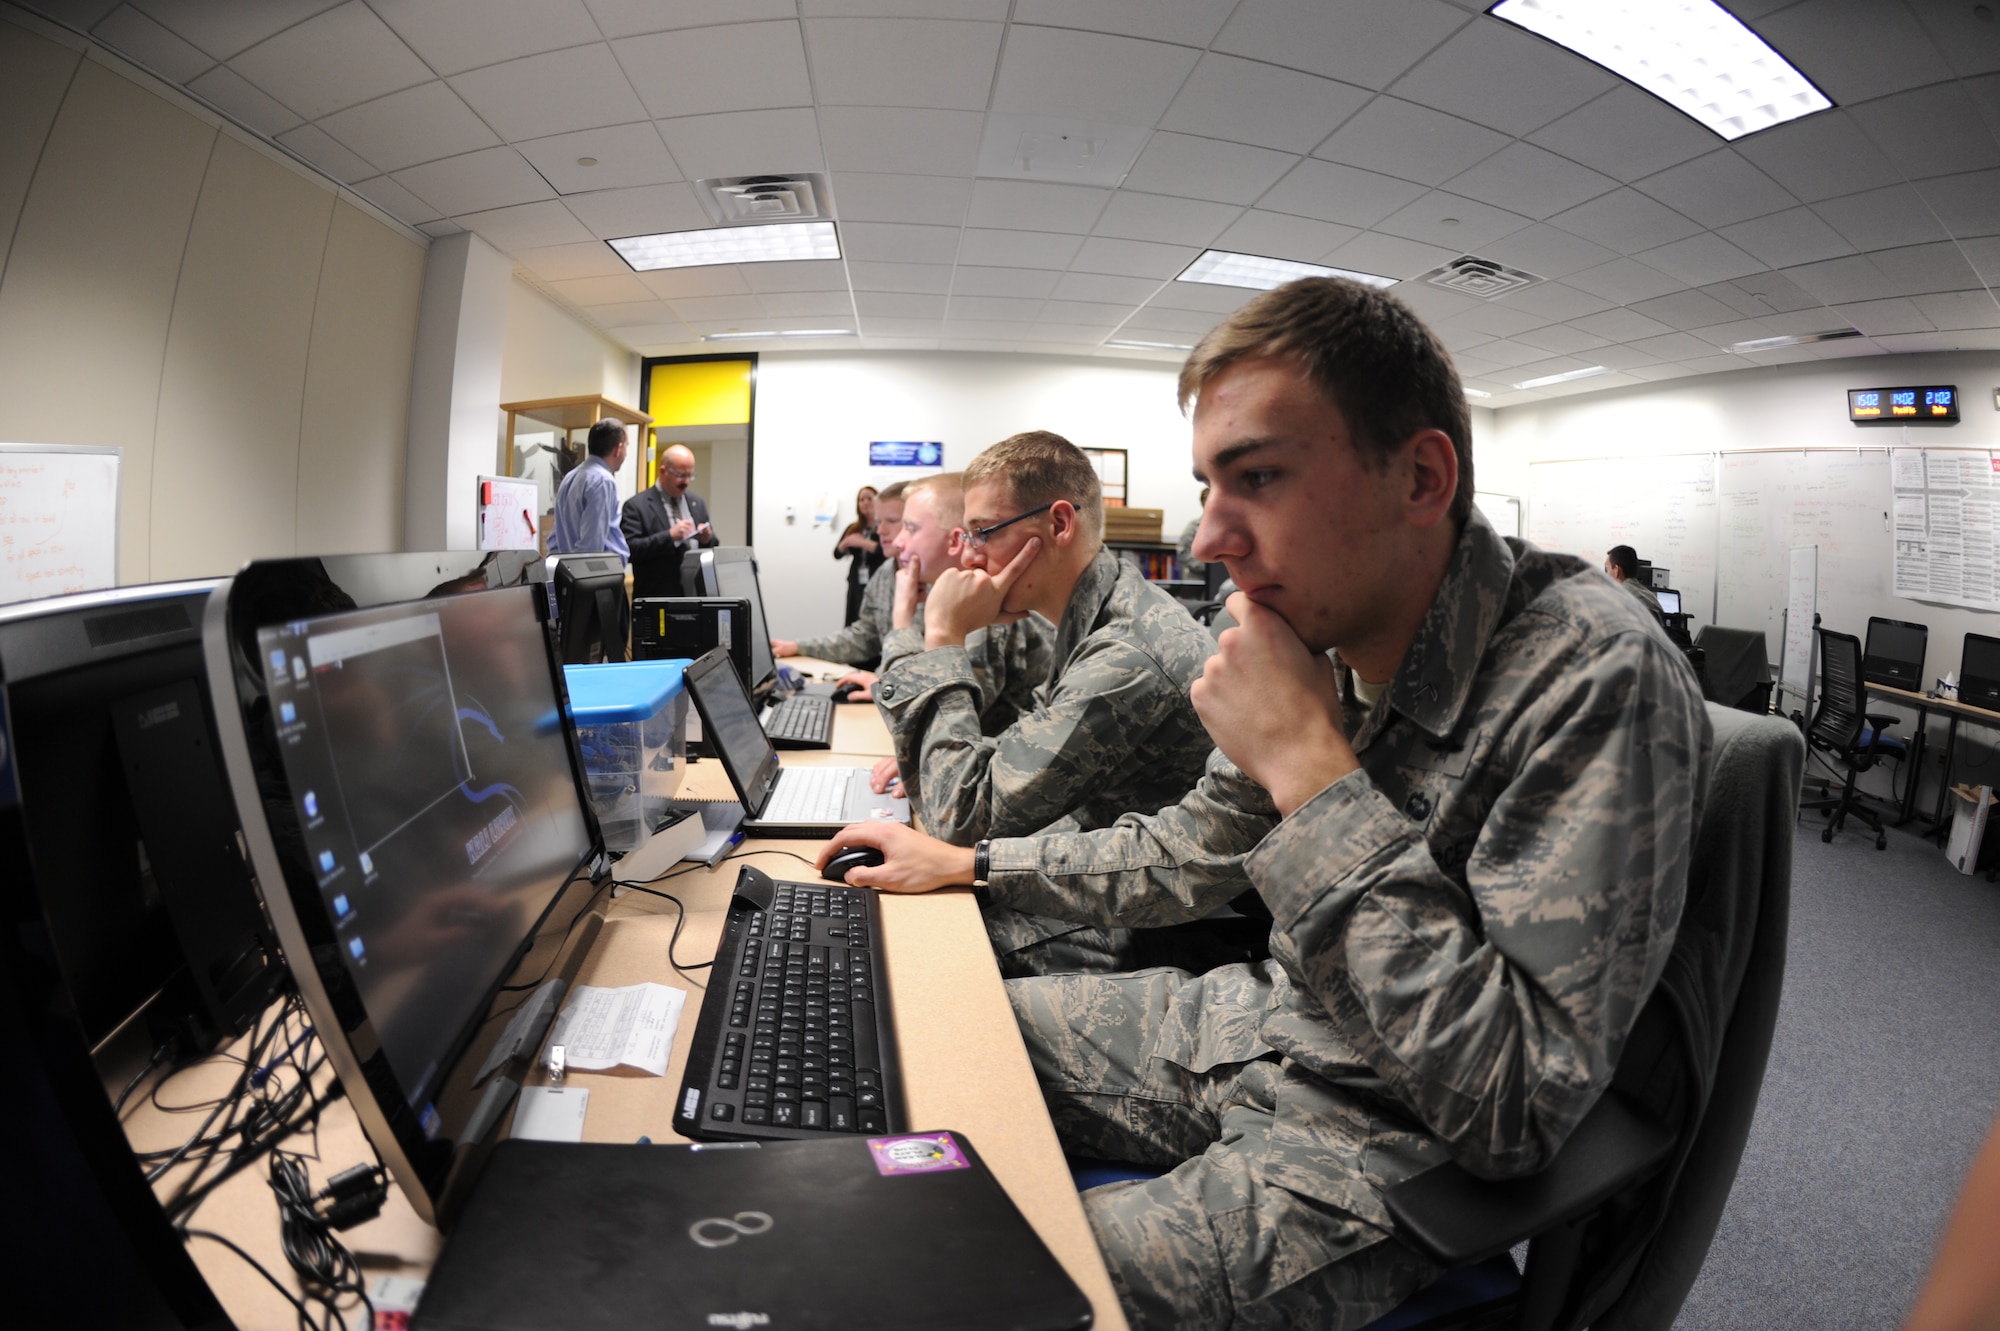 Members of the Academy Cyber Competition team run through scenarios in
preparation for an upcoming competition Dec. 10. (U.S. Air Force Photo/John Van Winkle)  